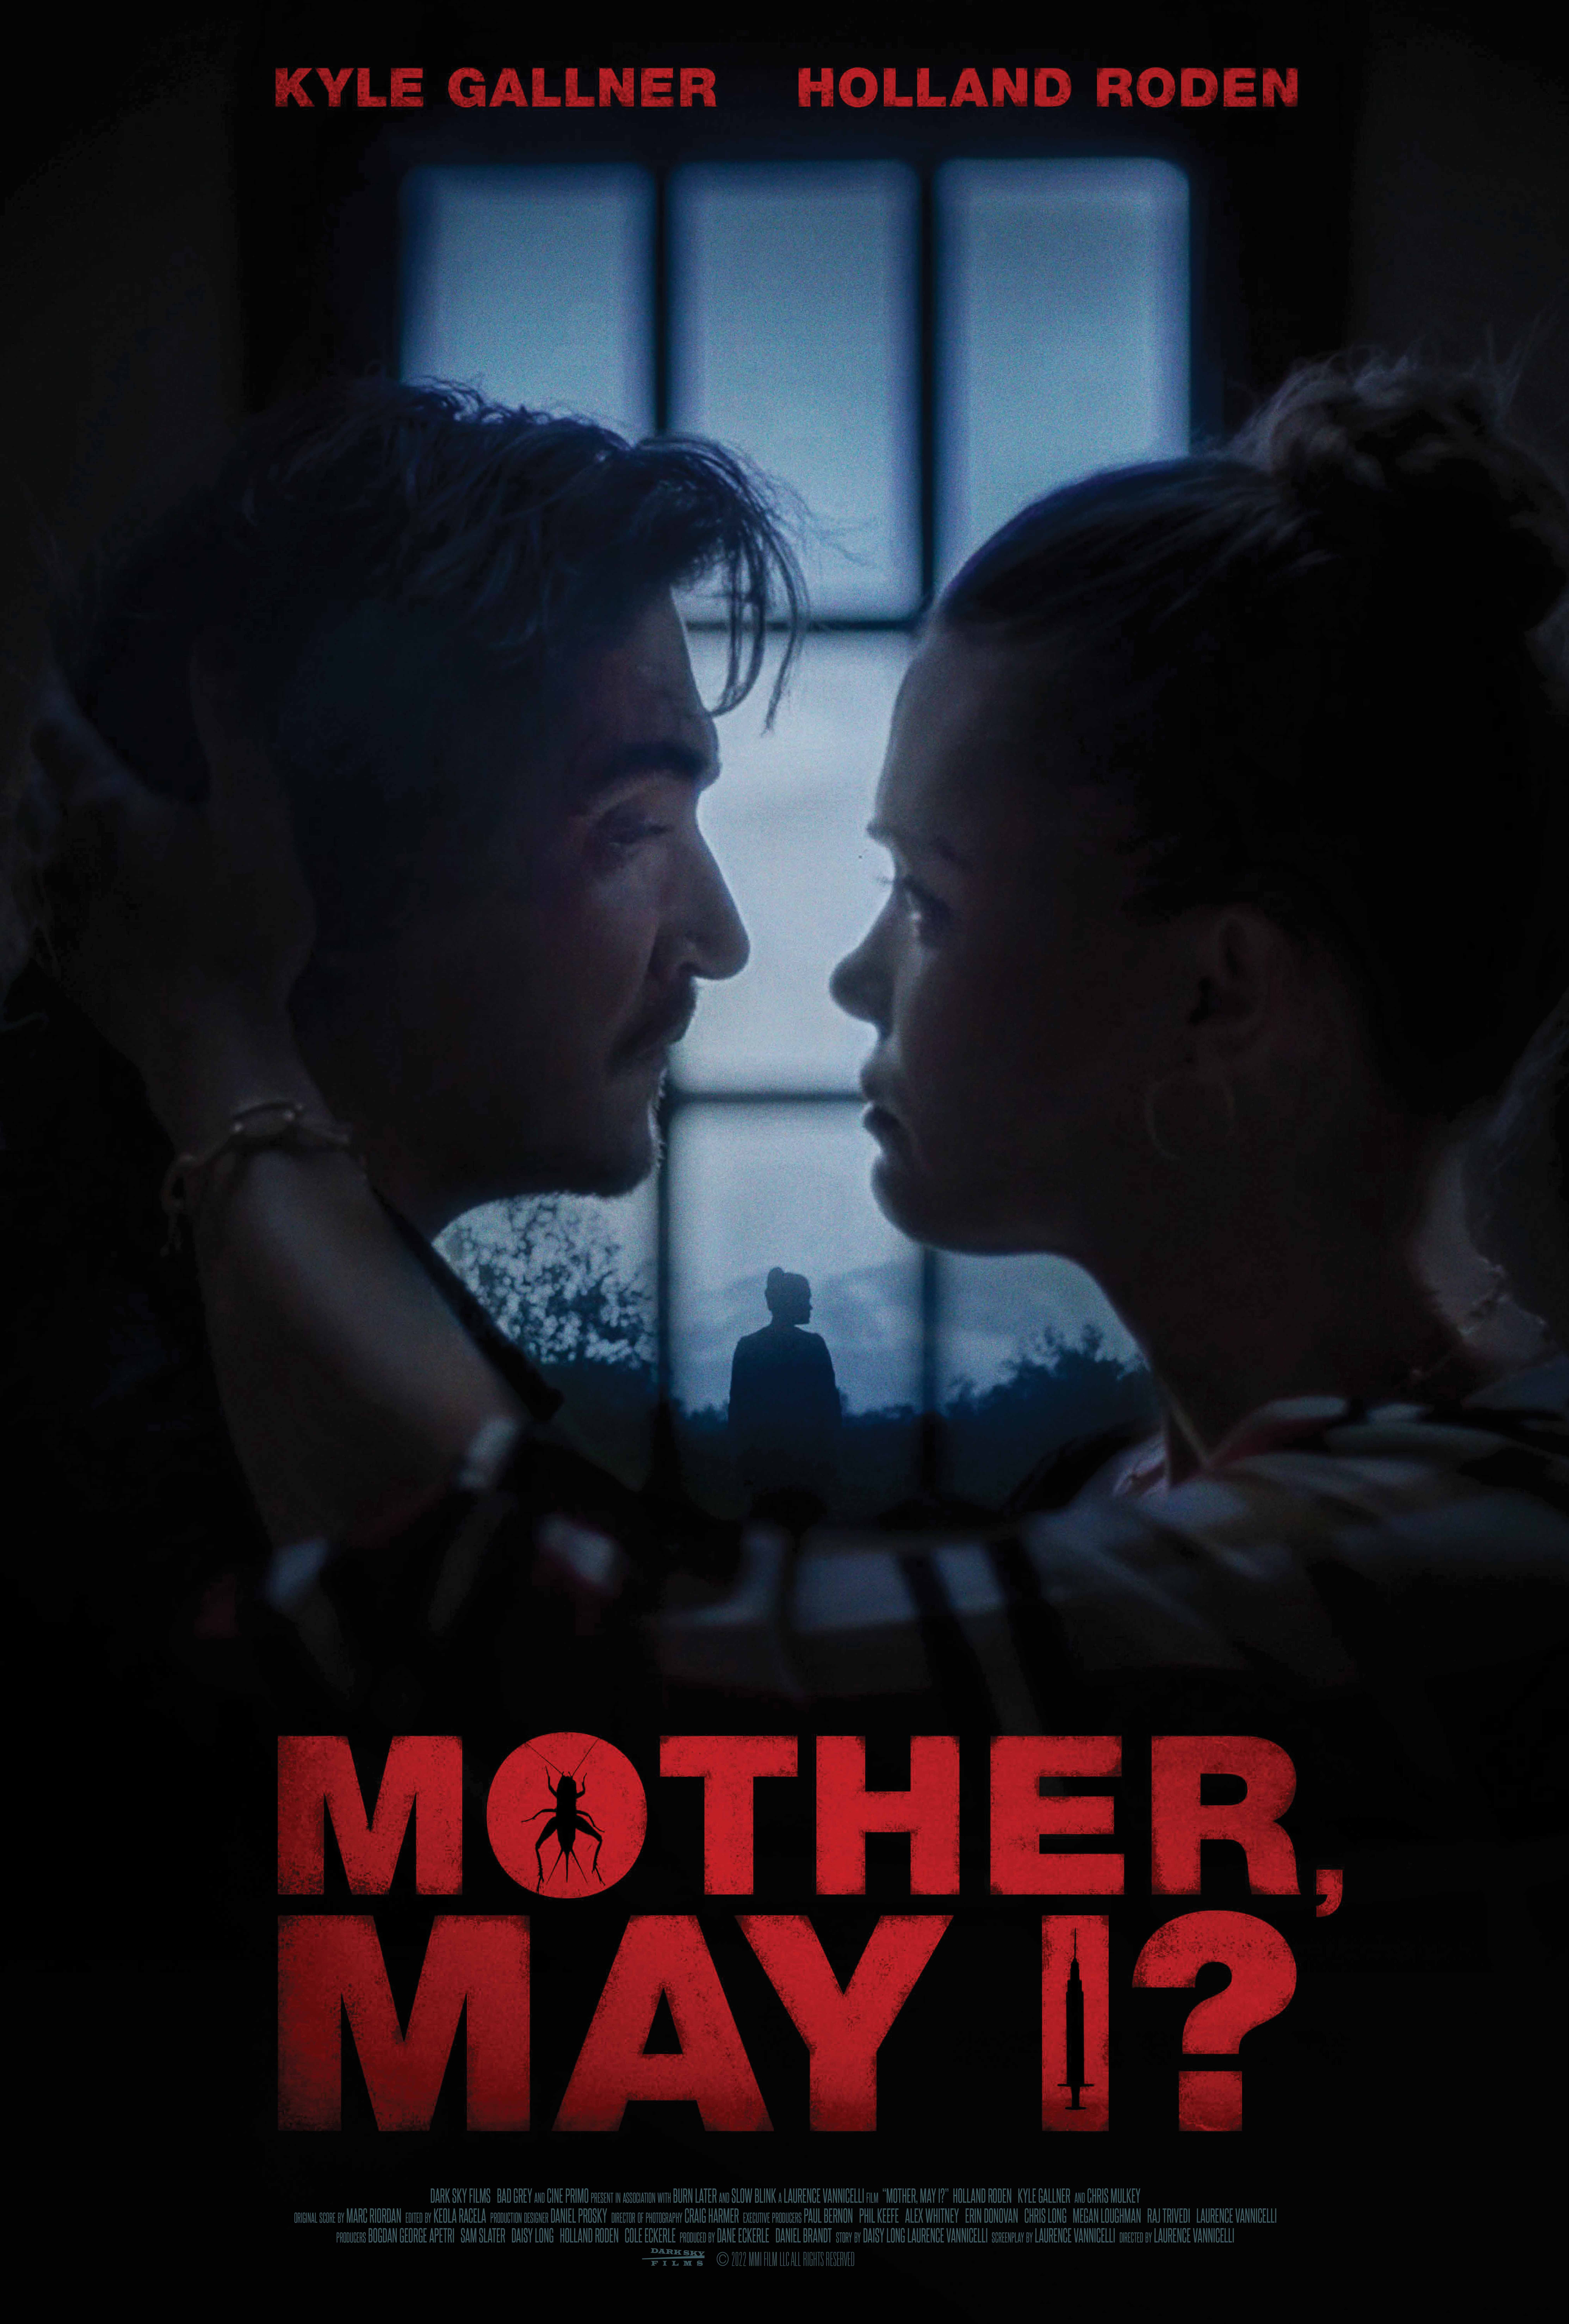 "Mother, May I?" - A Riveting Psychological Thriller Featuring Kyle Gallner and Holland Roden Set to Hit Theaters and VOD on July 21st 39